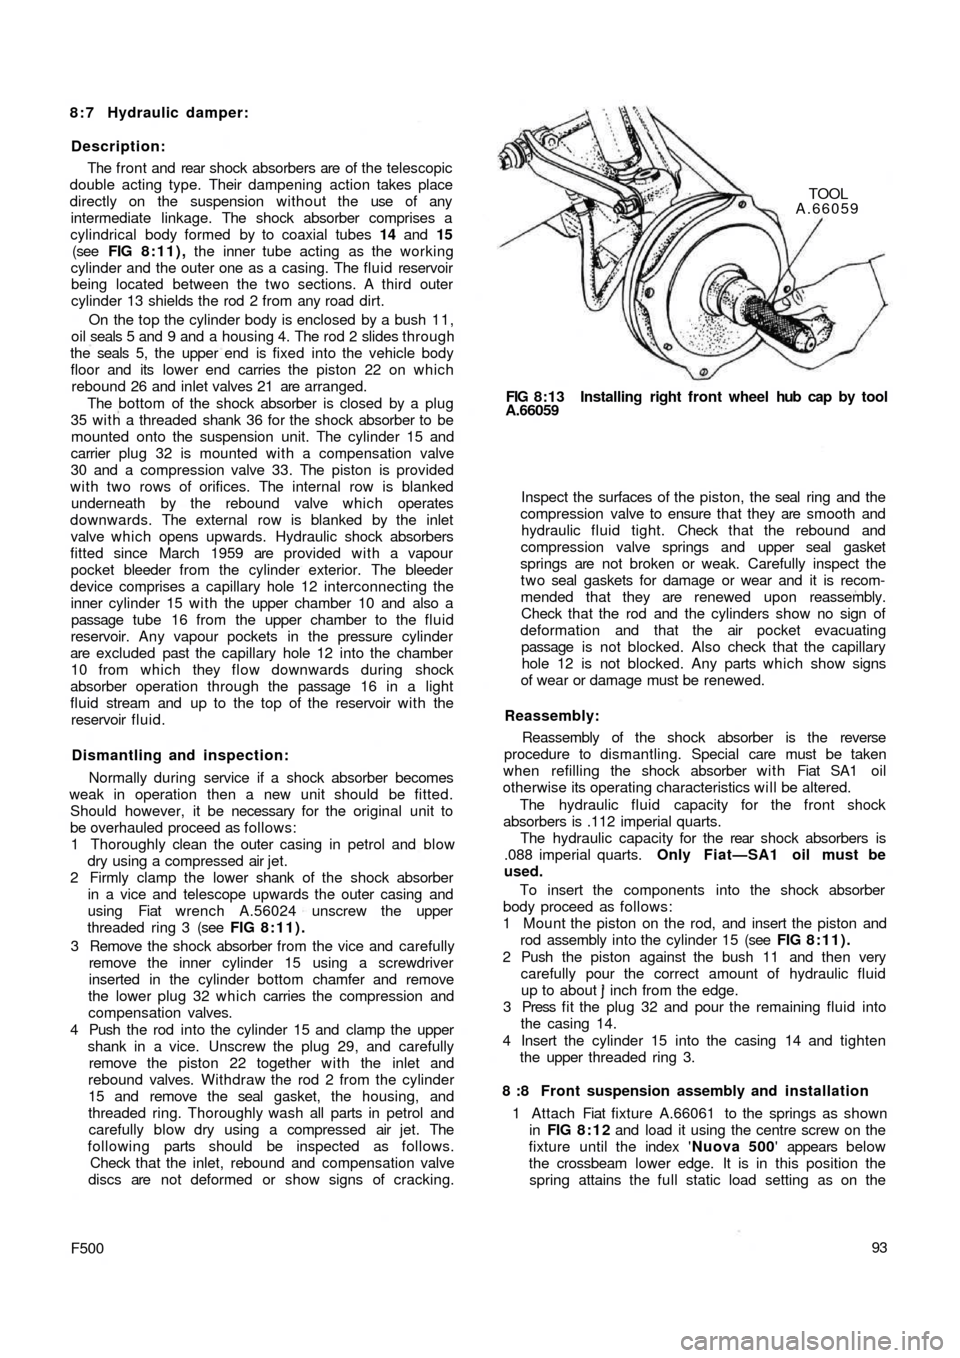 FIAT 500 1959 1.G Workshop Manual 8 : 7 Hydraulic damper:
Description:
The front and rear  shock absorbers are of the telescopic
double acting type. Their dampening action takes place
directly on the suspension without the use of any
